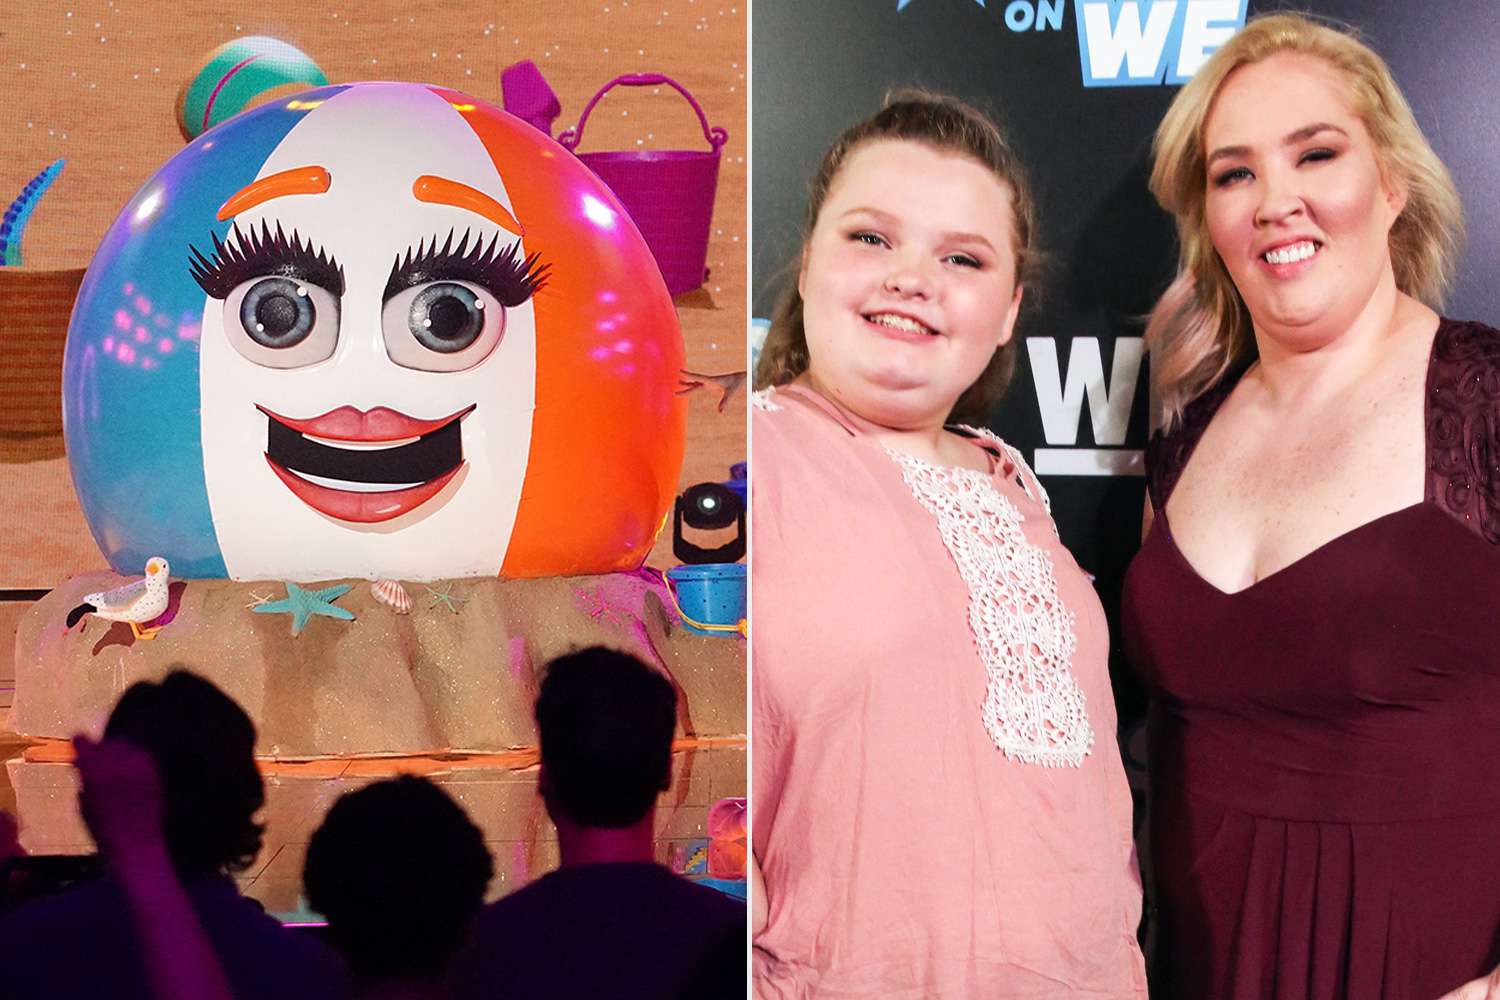 THE MASKED SINGER: Beach Ball in the “Giving Thanks” episode of THE MASKED SINGER airing Wednesday, Nov. 3 (8:00-9:00 PM ET/PT) on FOX. © 2021 FOX MEDIA LLC. CR: FOX. LOS ANGELES, CA - JULY 31: TV Personality Alana Thompson "Honey Boo Boo" and June Shannon "Mama June" attends the 2nd Annual Bossip "Best Dressed List" event at Avenue on July 31, 2018 in Los Angeles, California. (Photo by Robin L Marshall/Getty Images)